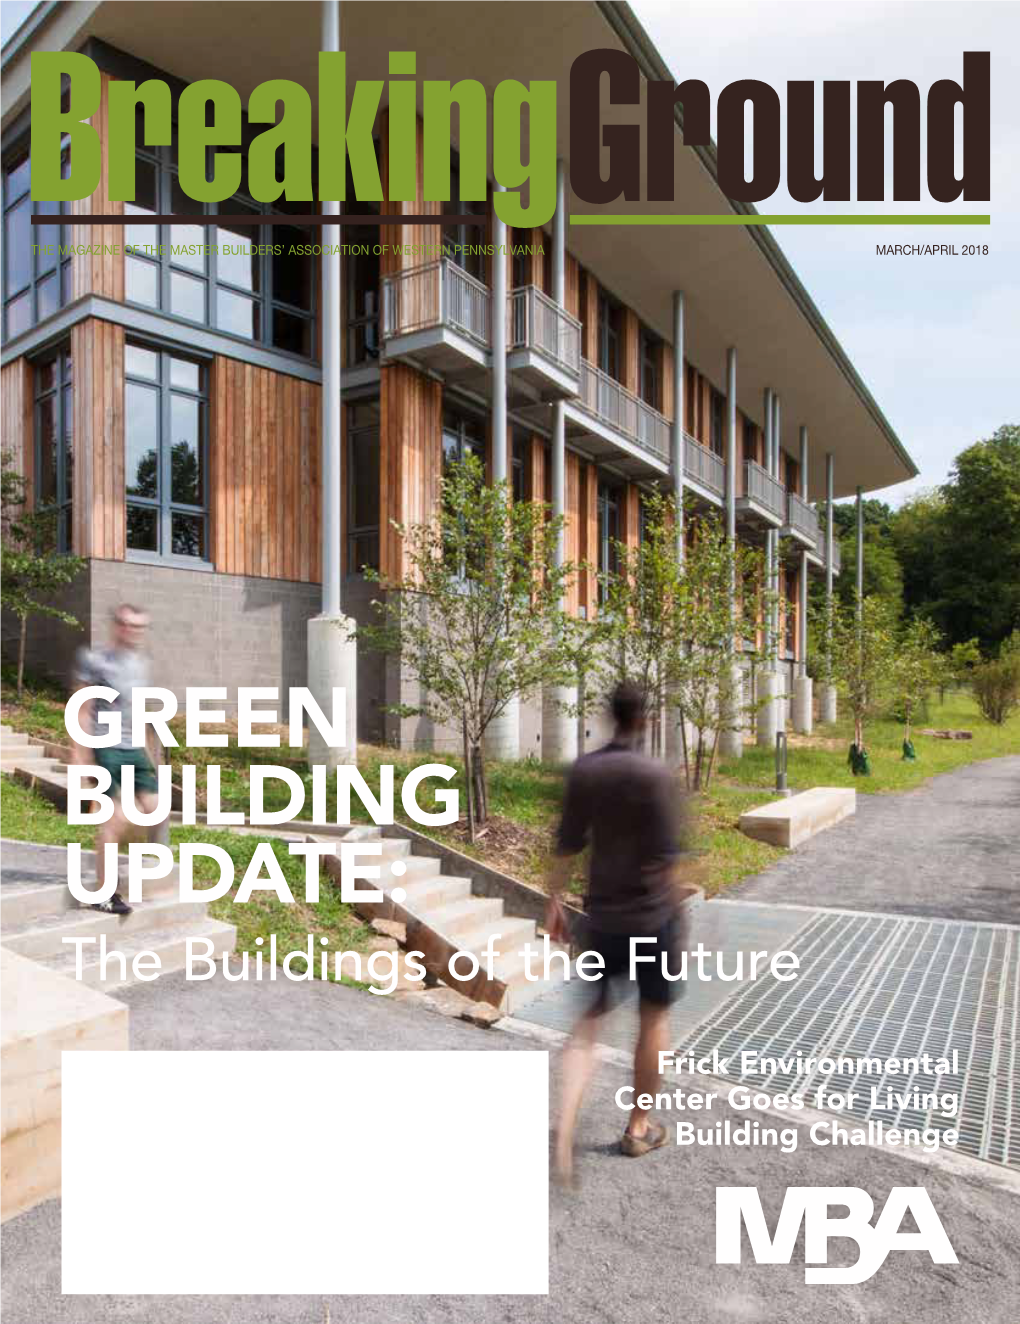 GREEN BUILDING UPDATE: the Buildings of the Future